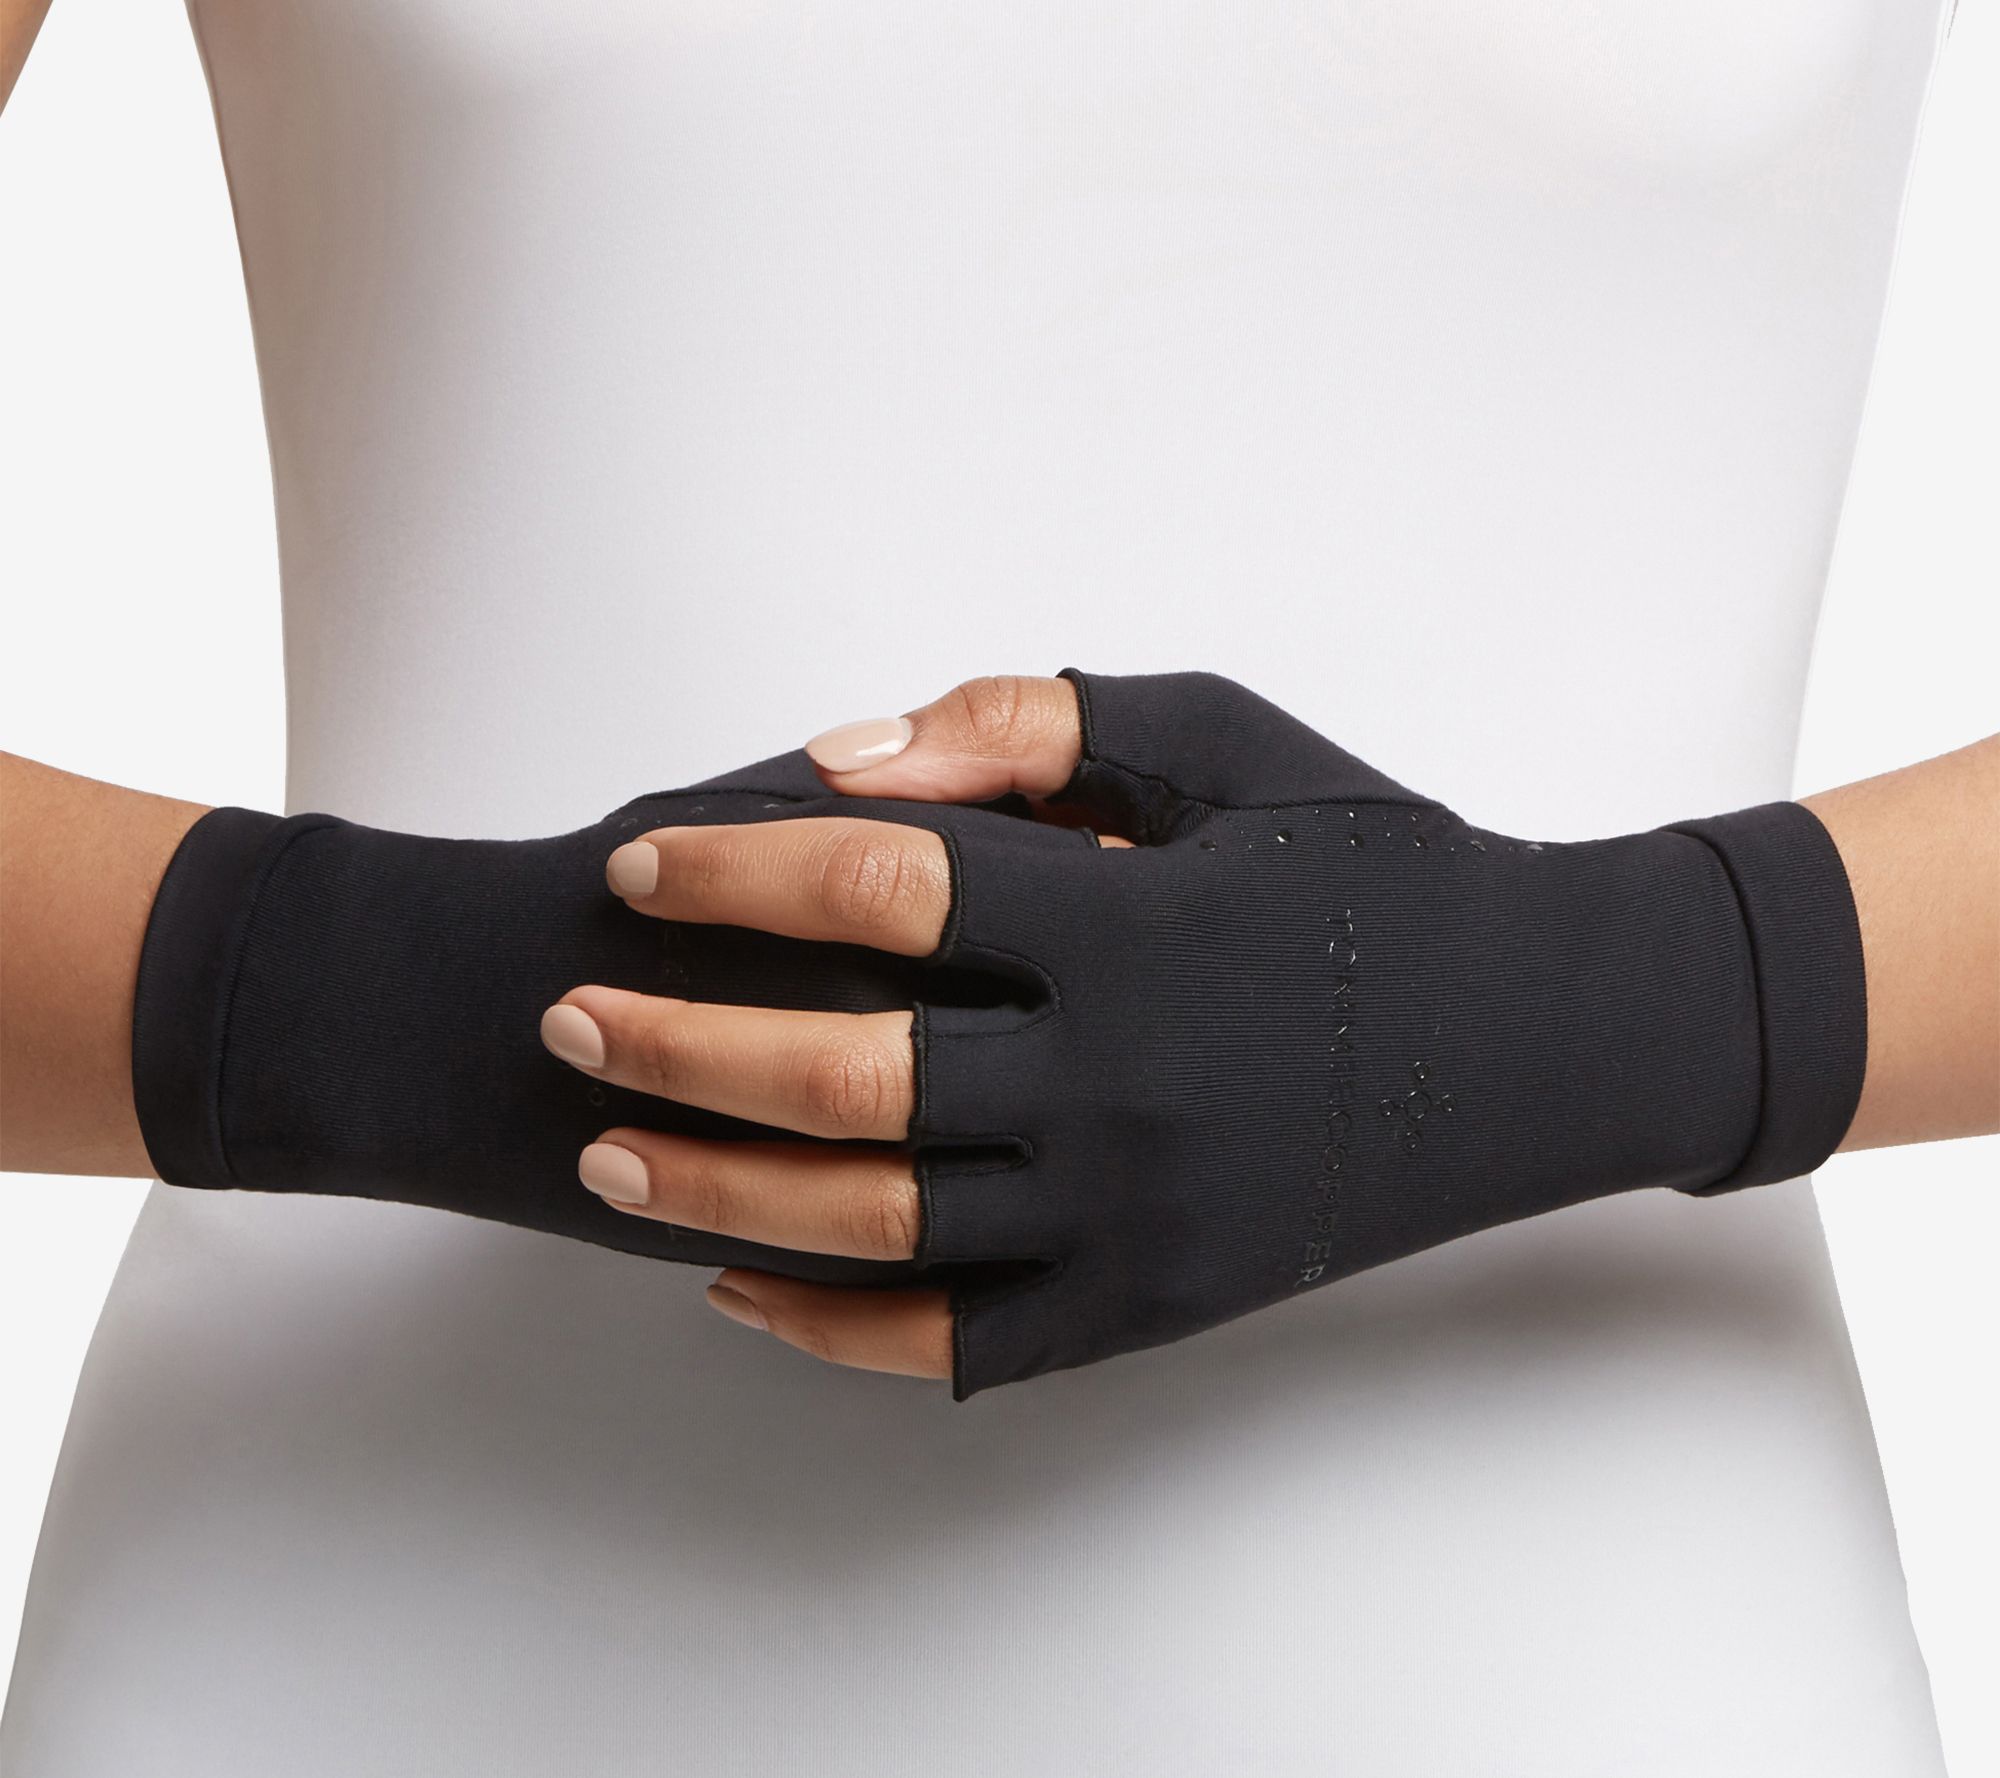 Tommie Copper Infrared Compression Fingerless Gloves 